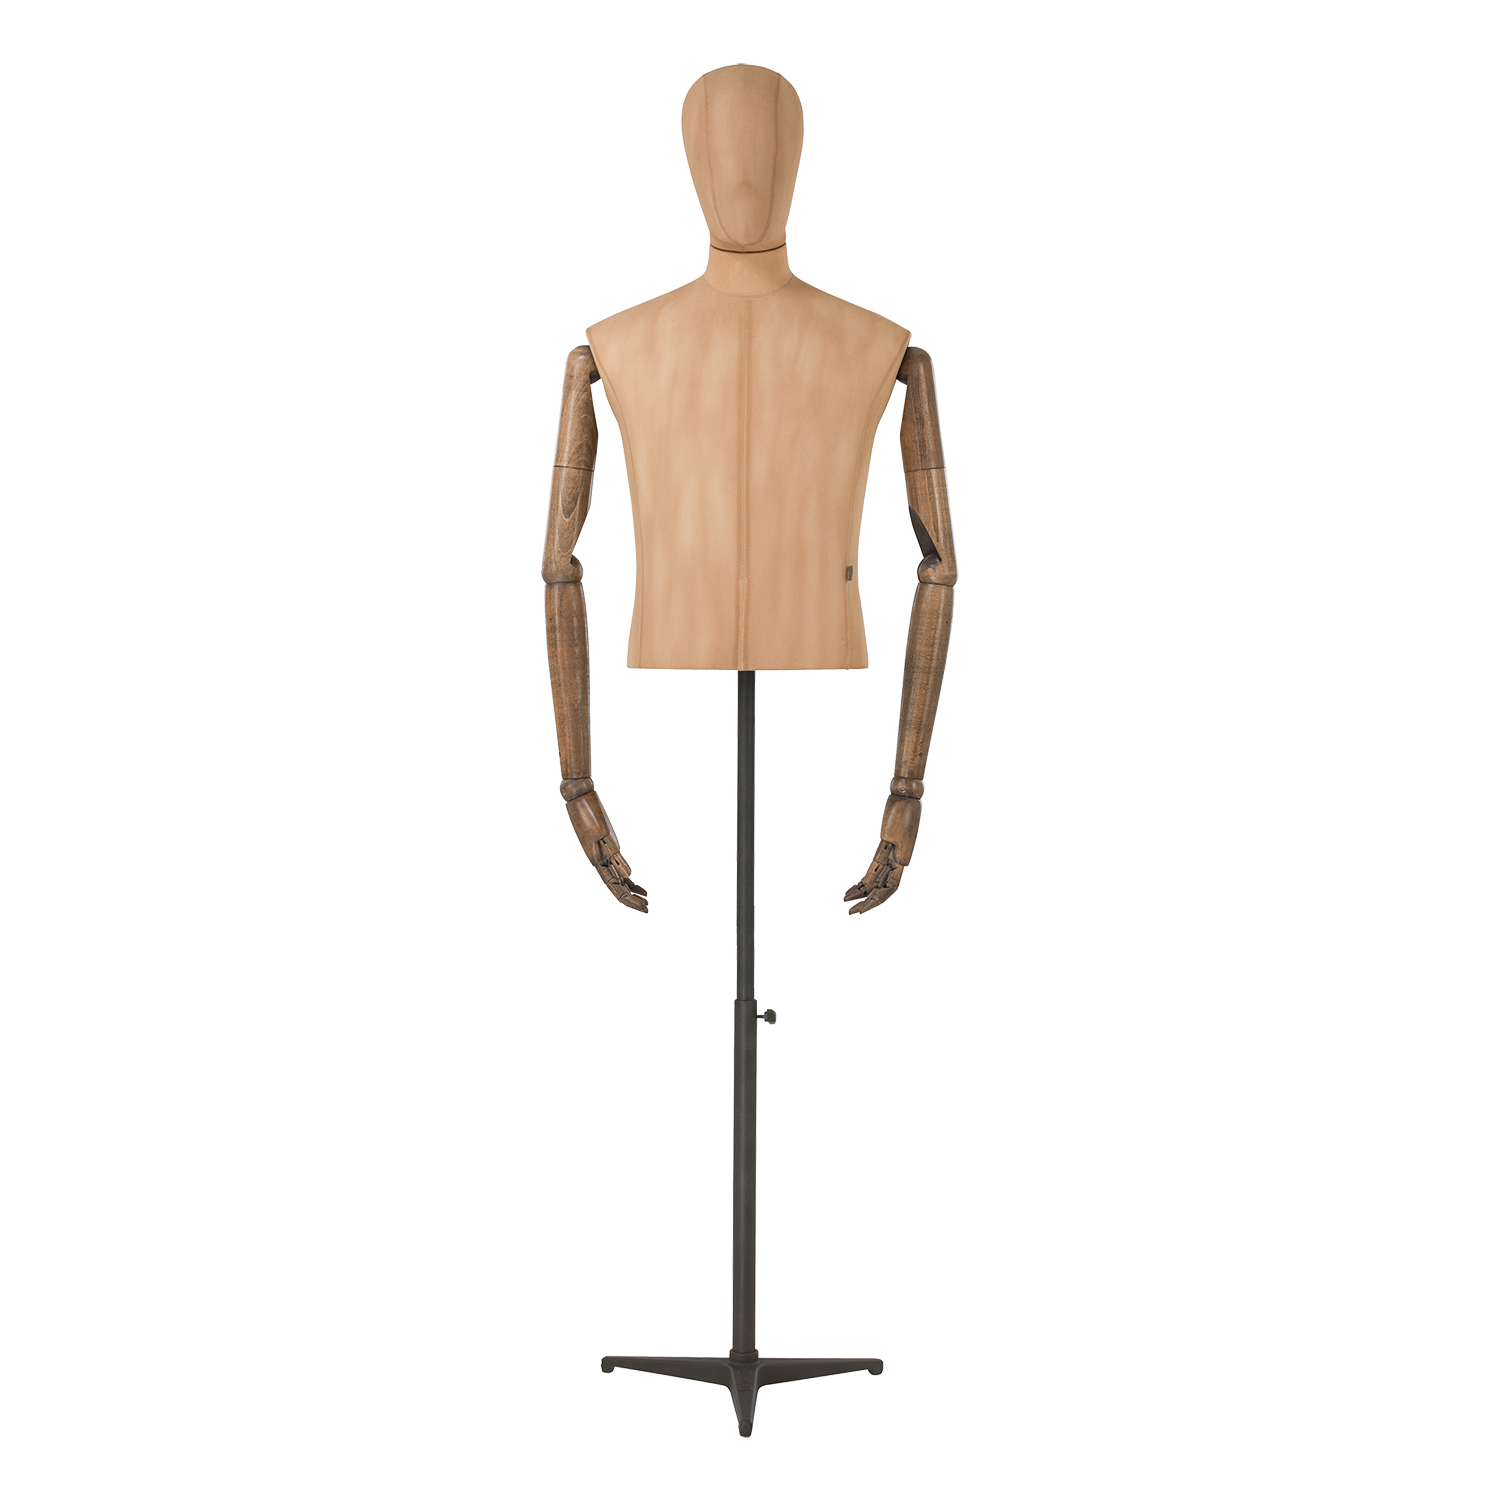 Male Articulated Mannequin Free PNG